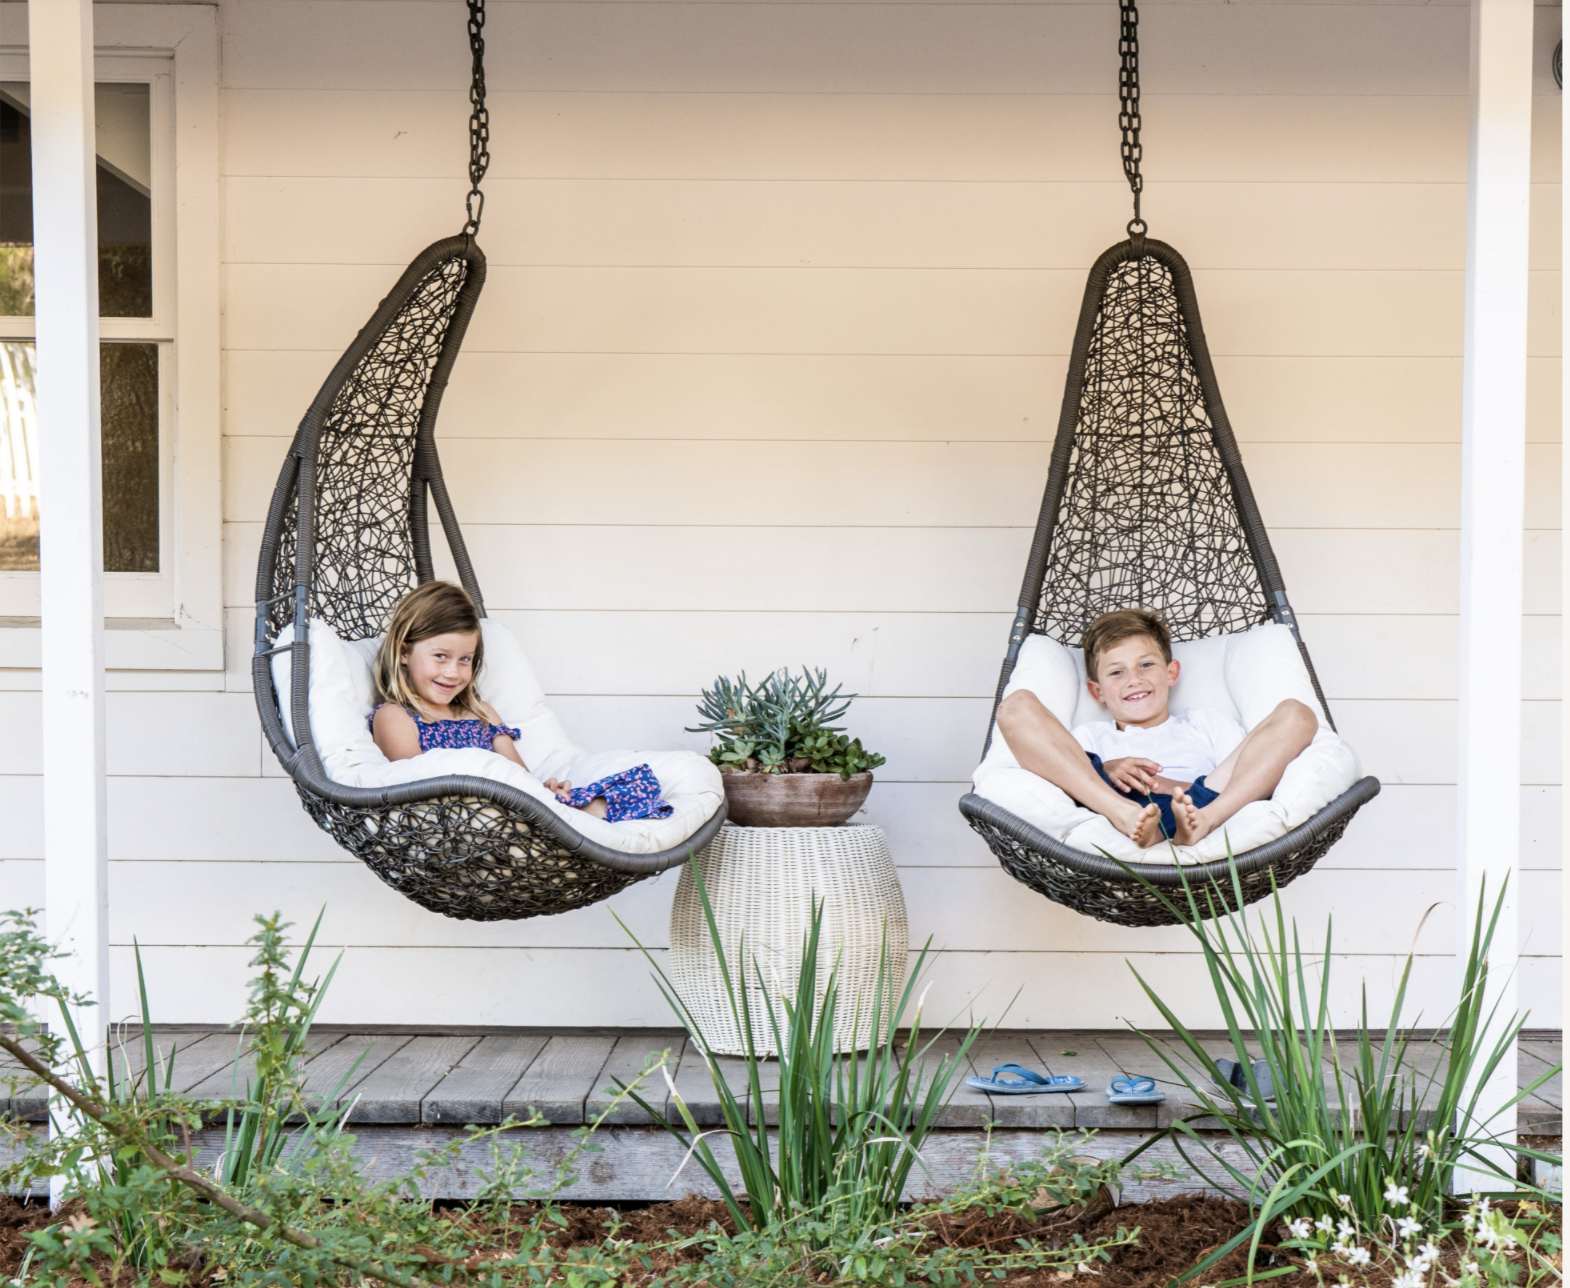 Two children seated in hanging chairs on porch